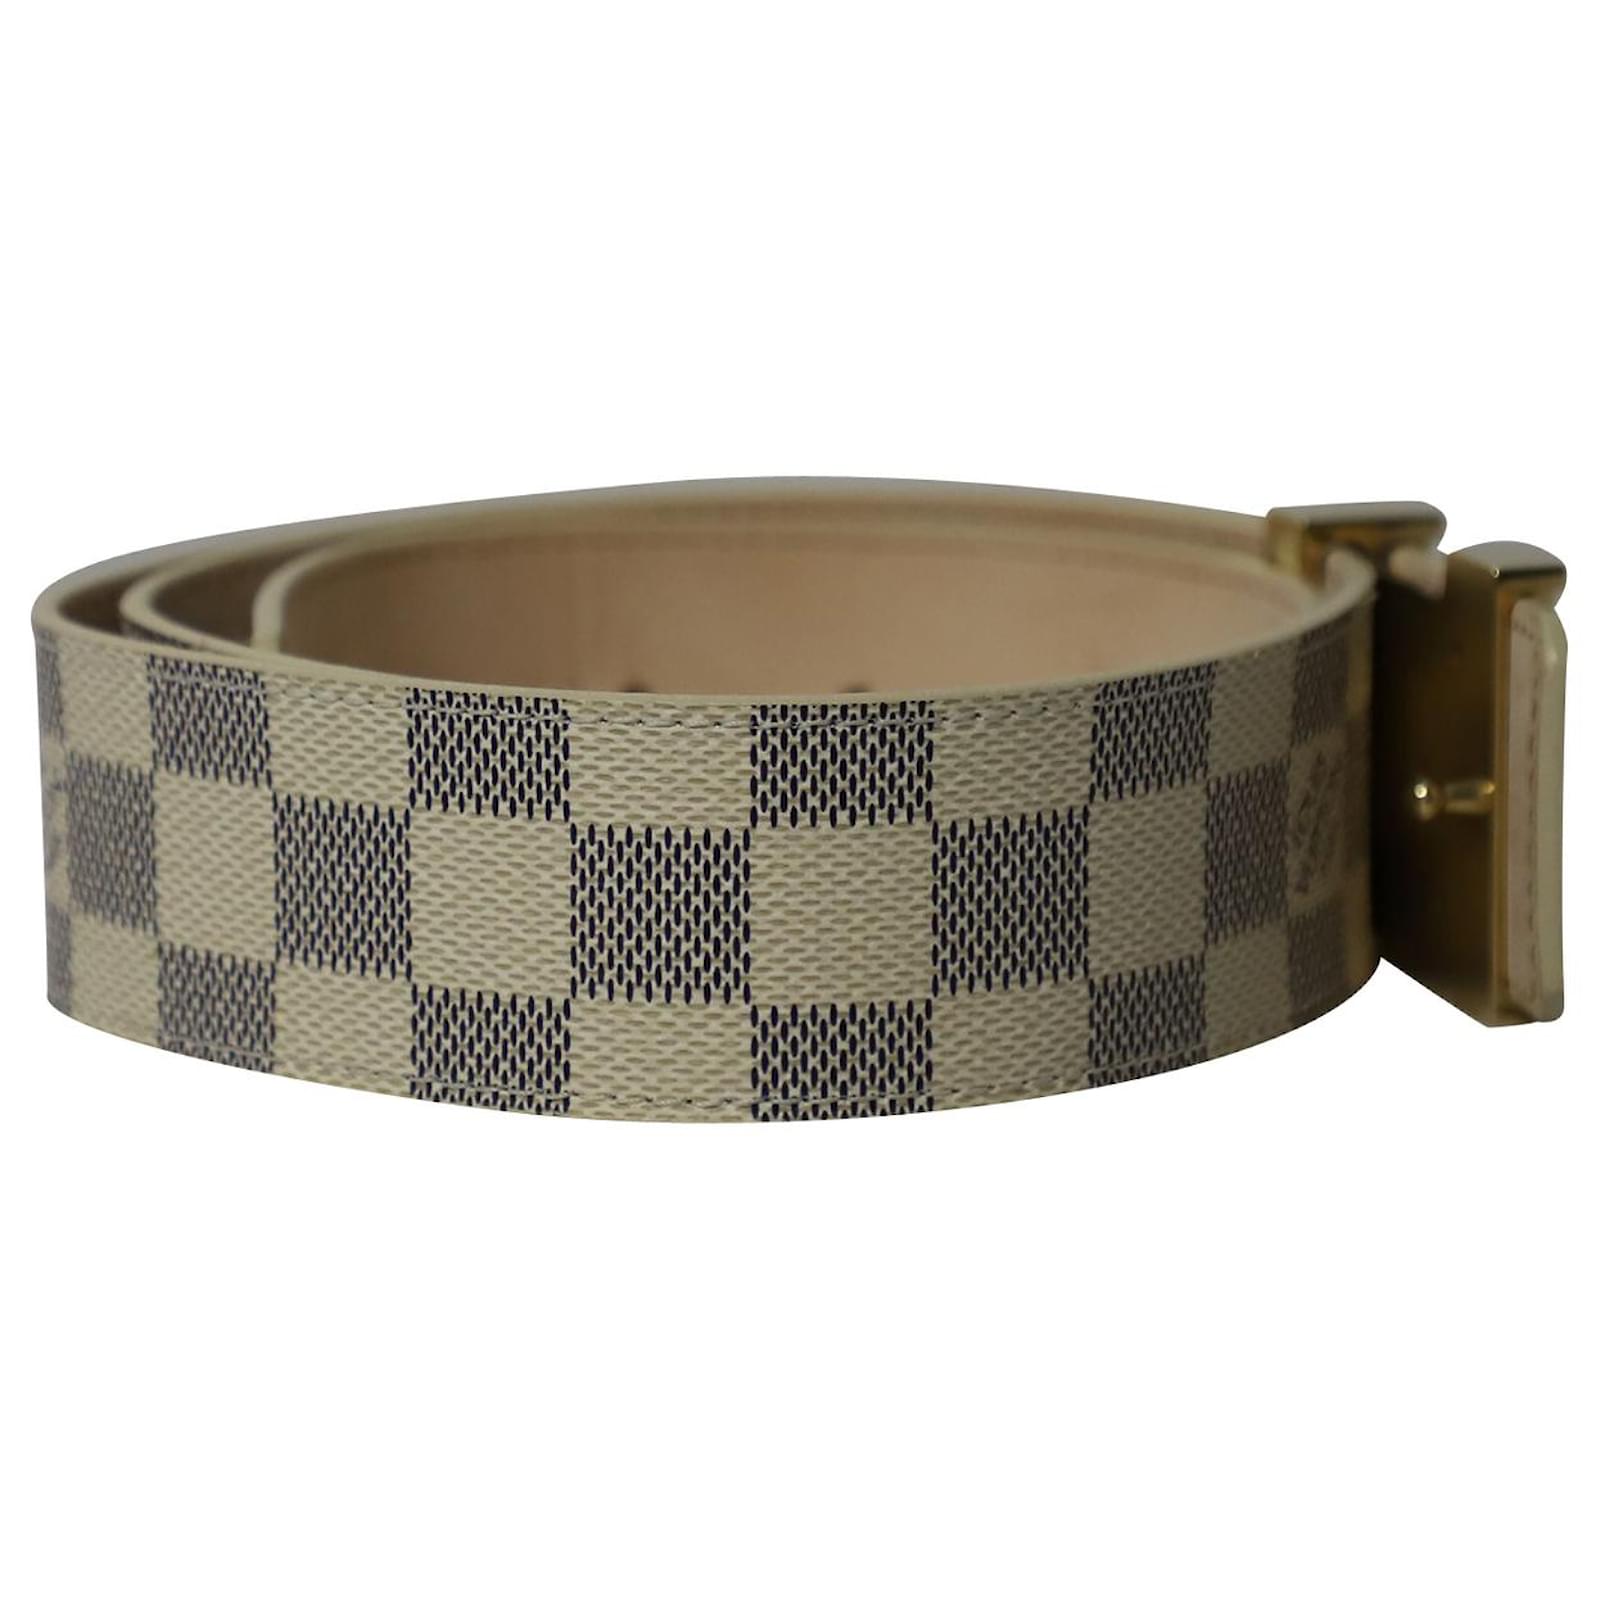 Louis Vuitton LV Initiales Reversible Belt in White Leather ref